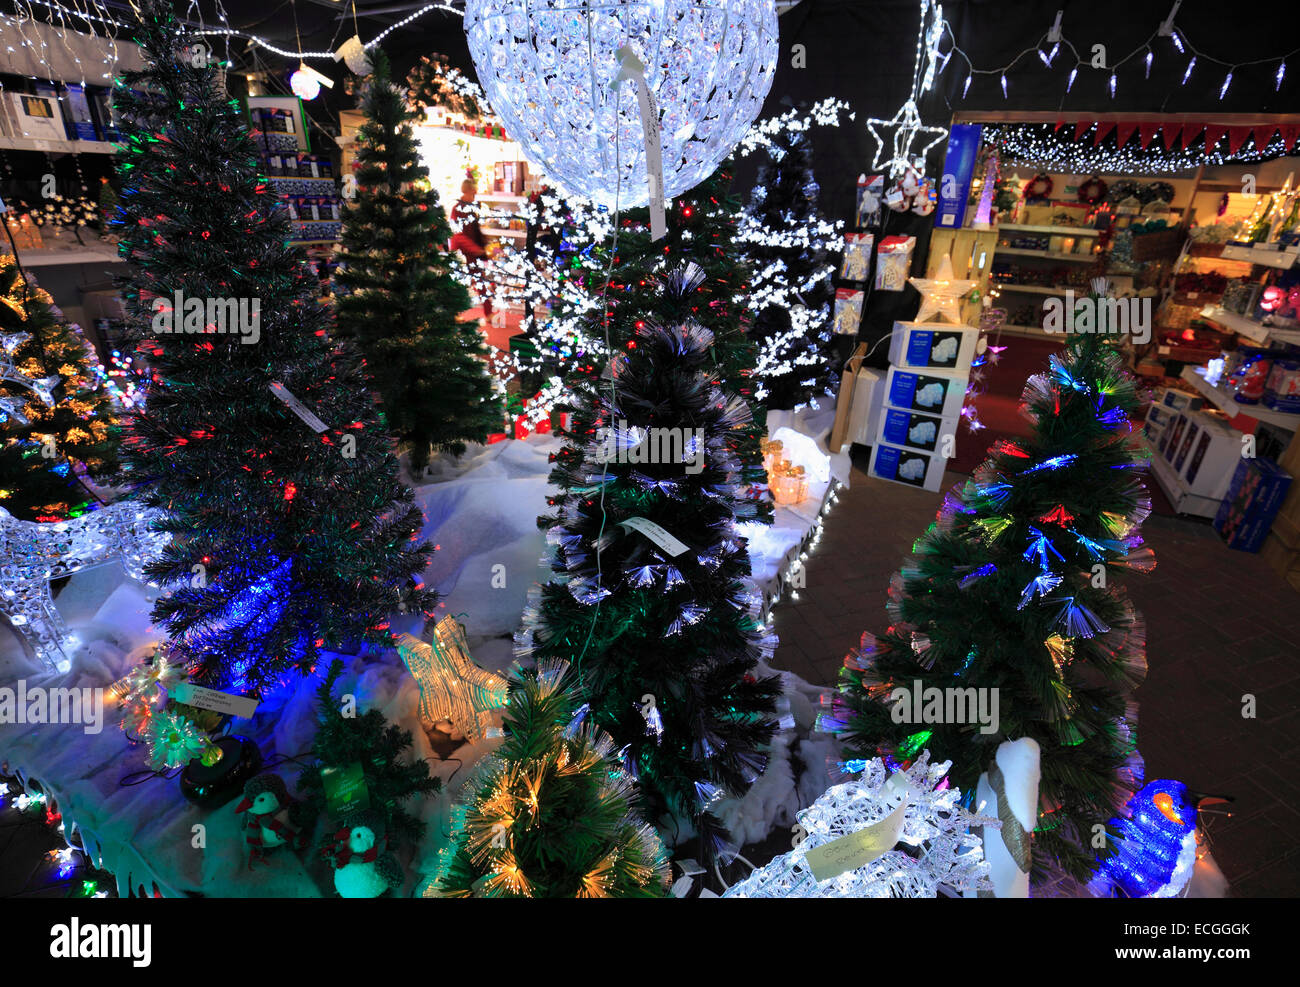 Artificial Christmas trees and decorations for sale in a shop. Stock Photo